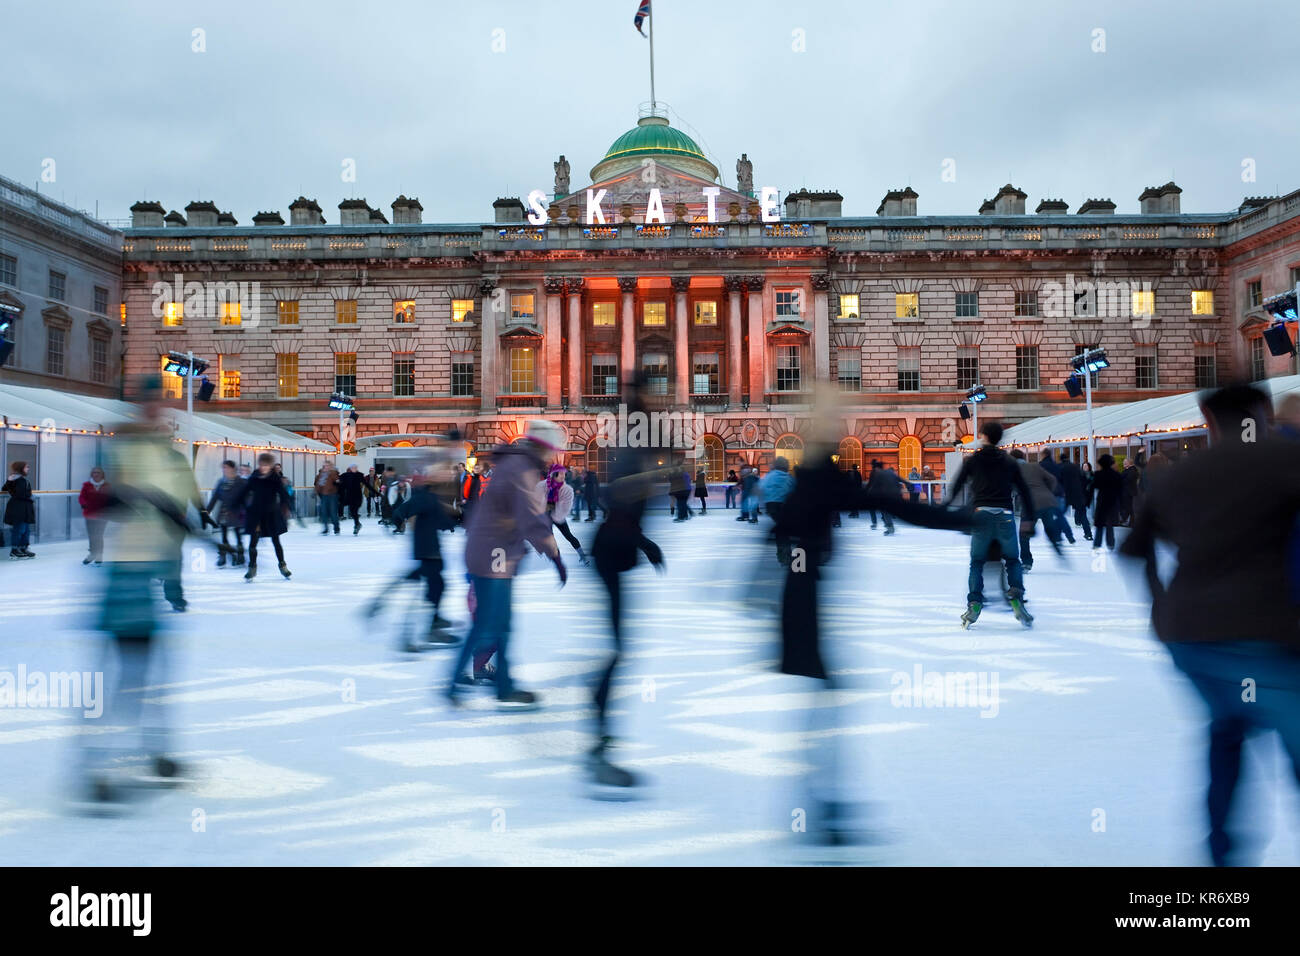 Ice skaters on the ice rink in the courtyard of Somerset House, London, UK. Stock Photo